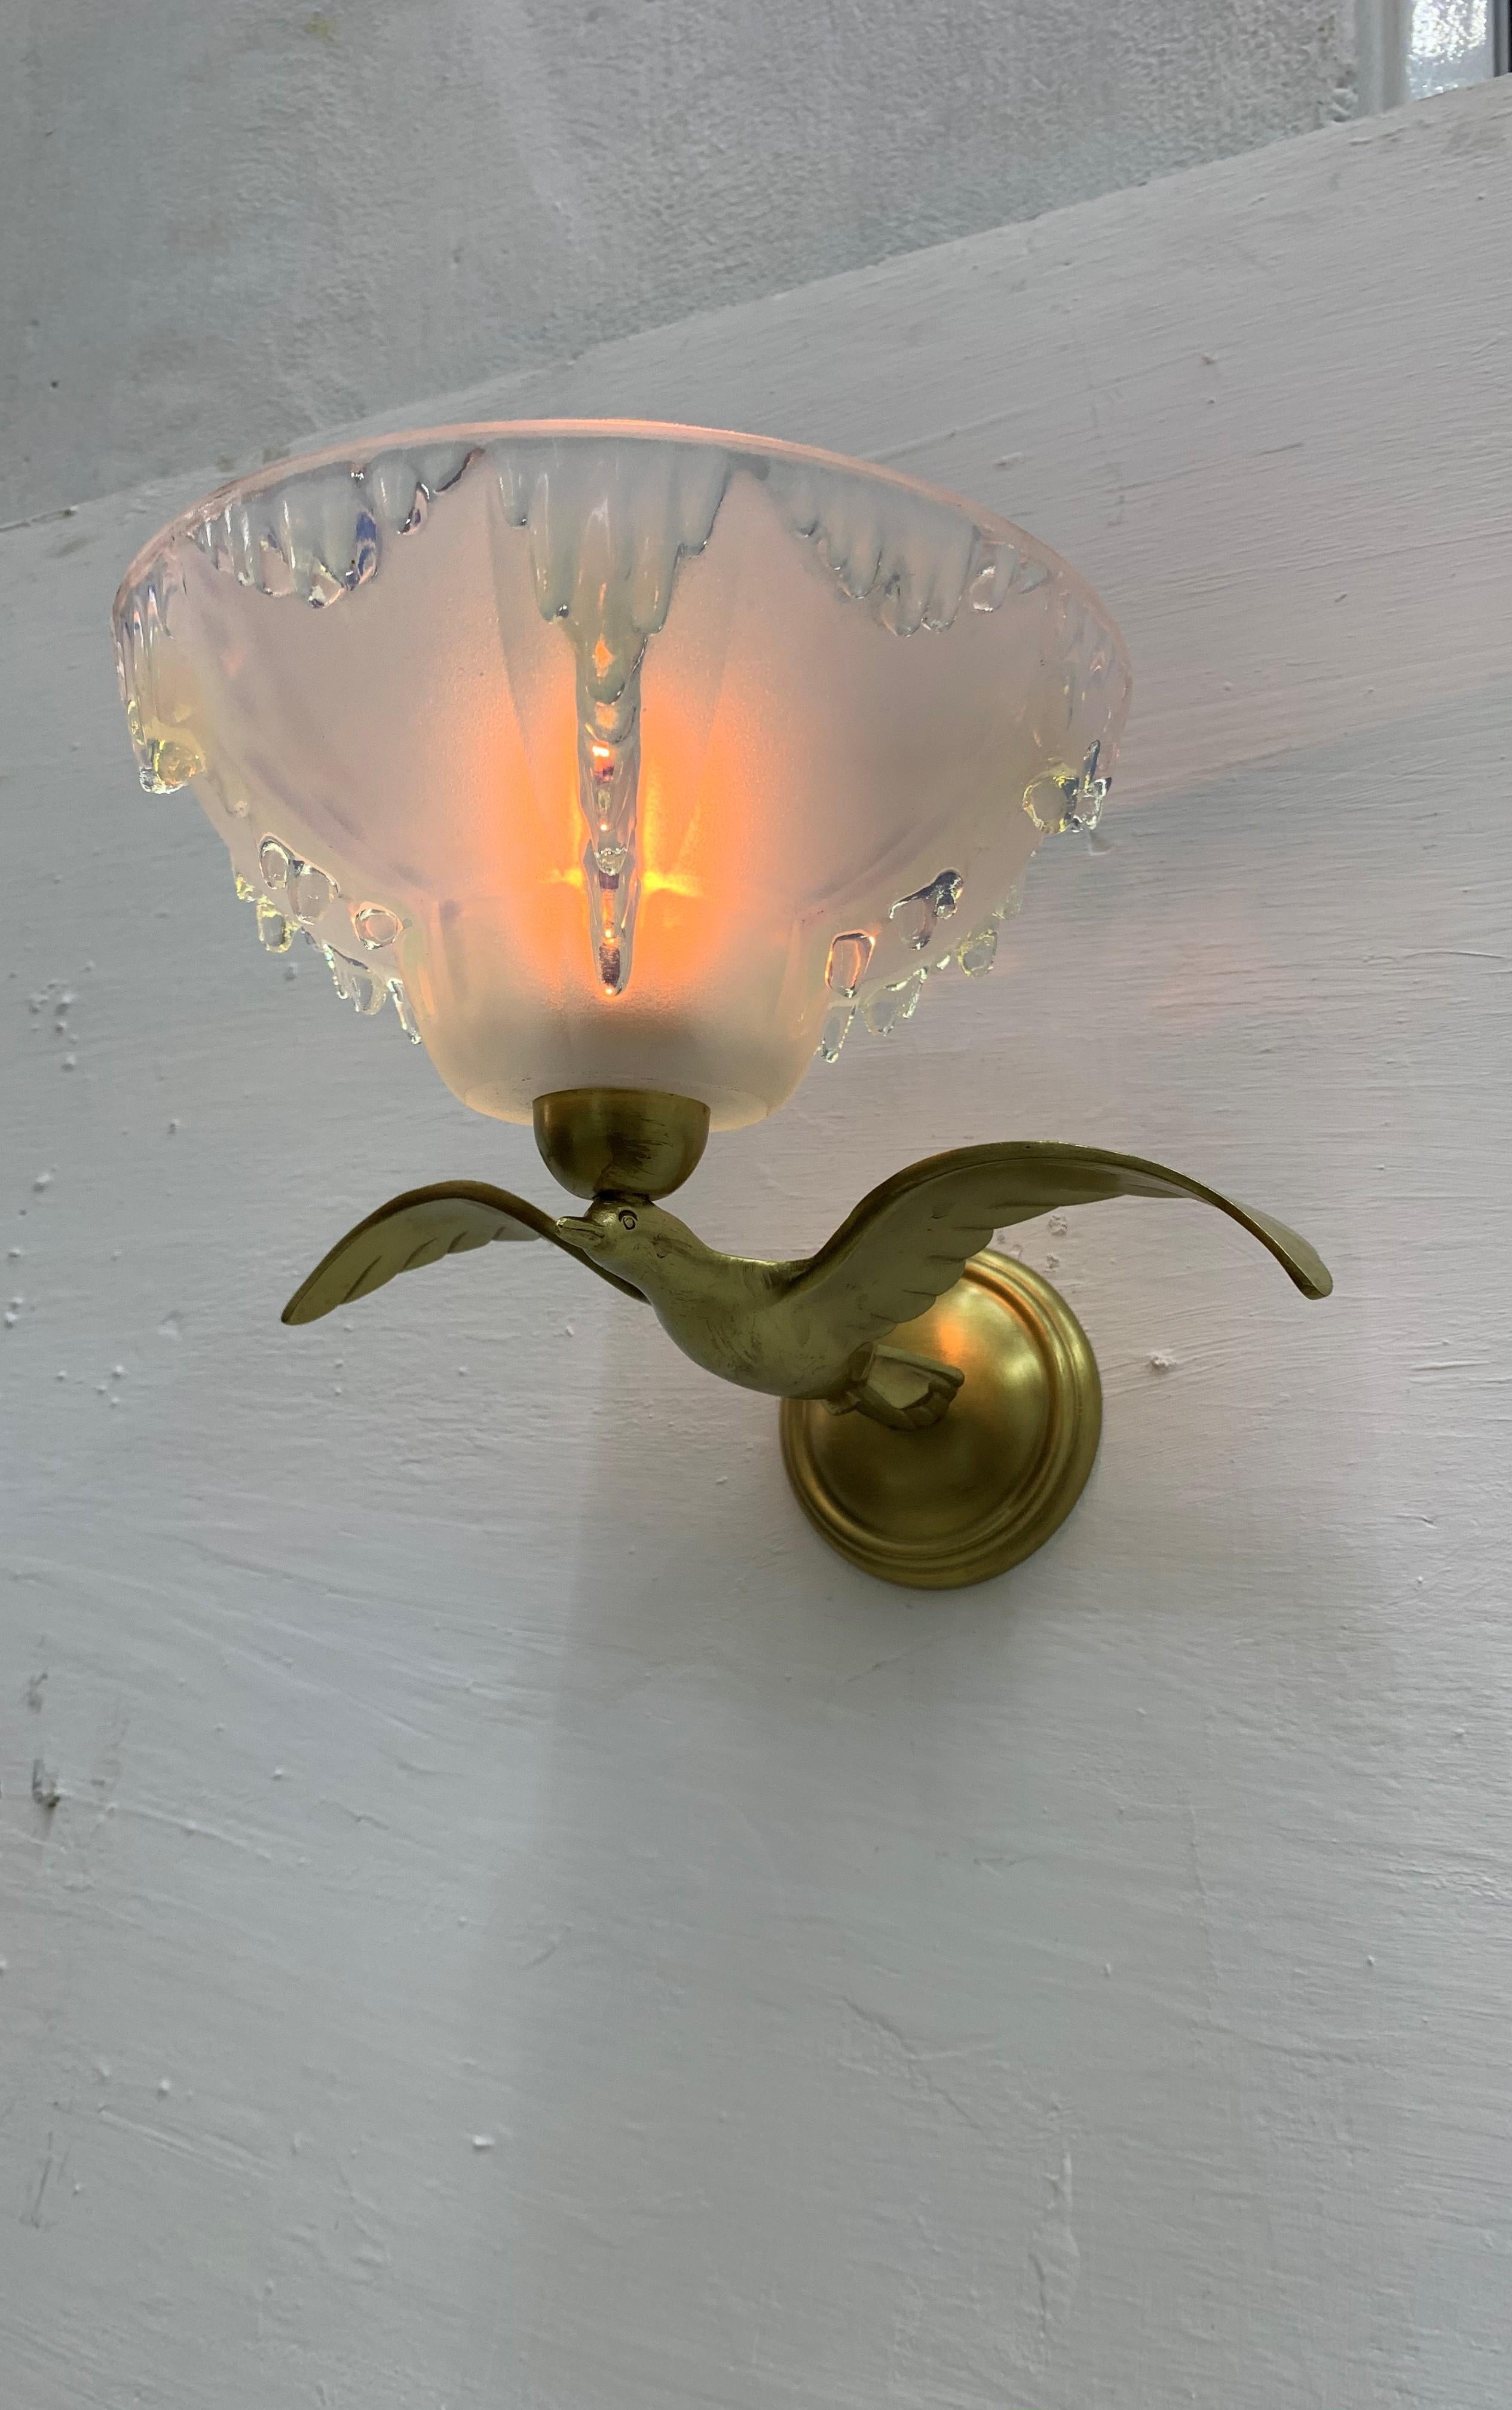 3 Art Deco Brass Sconces Signed by Ezan, France circa 1940s In Good Condition For Sale In Merida, Yucatan